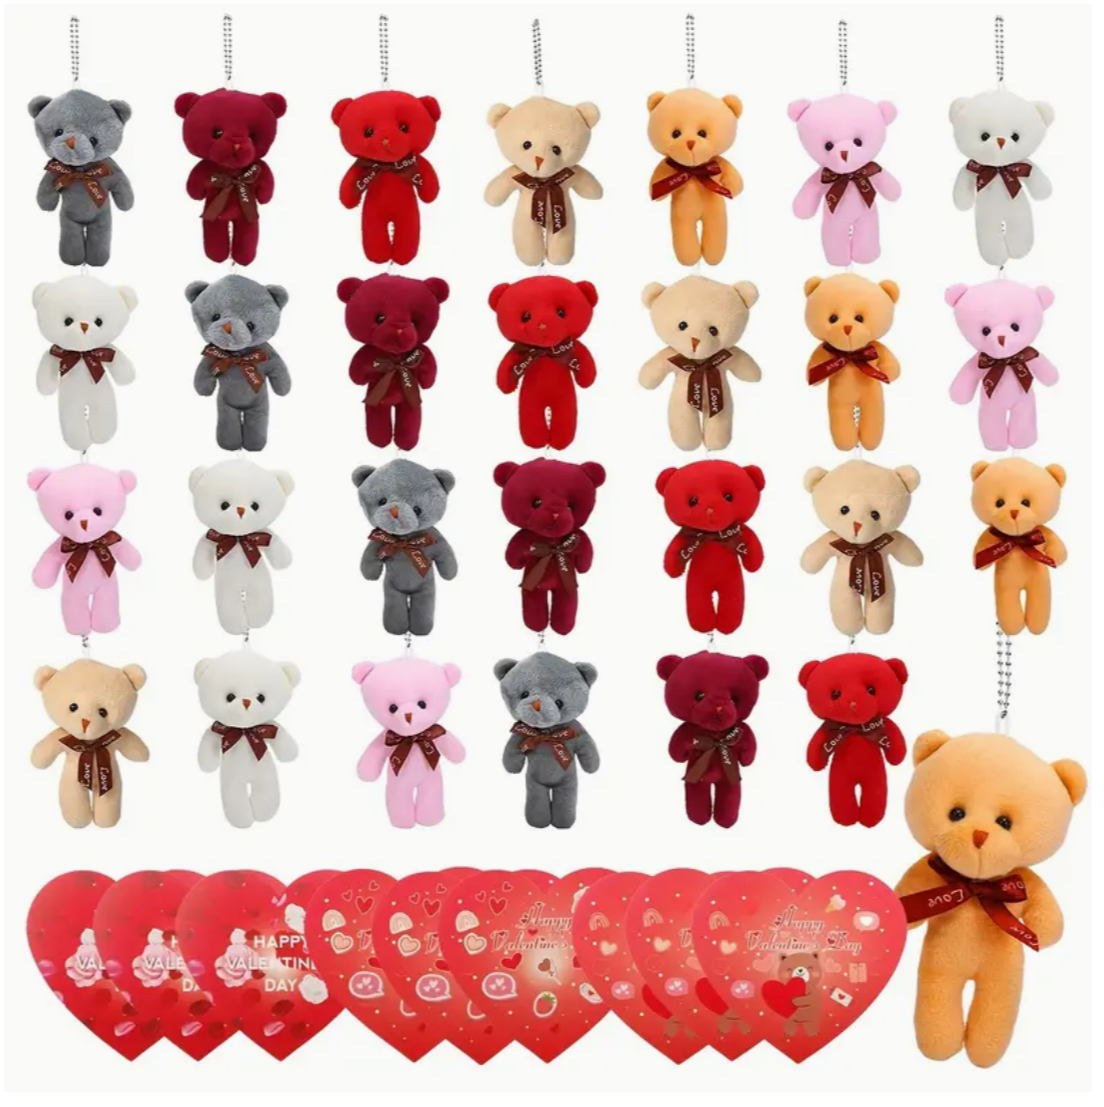 Love in Every Hug: 24 Adorable Valentine's Day Mini Plush Bears with Heartfelt Cards - Perfect for Parties, Gifts, and Classroom Fun